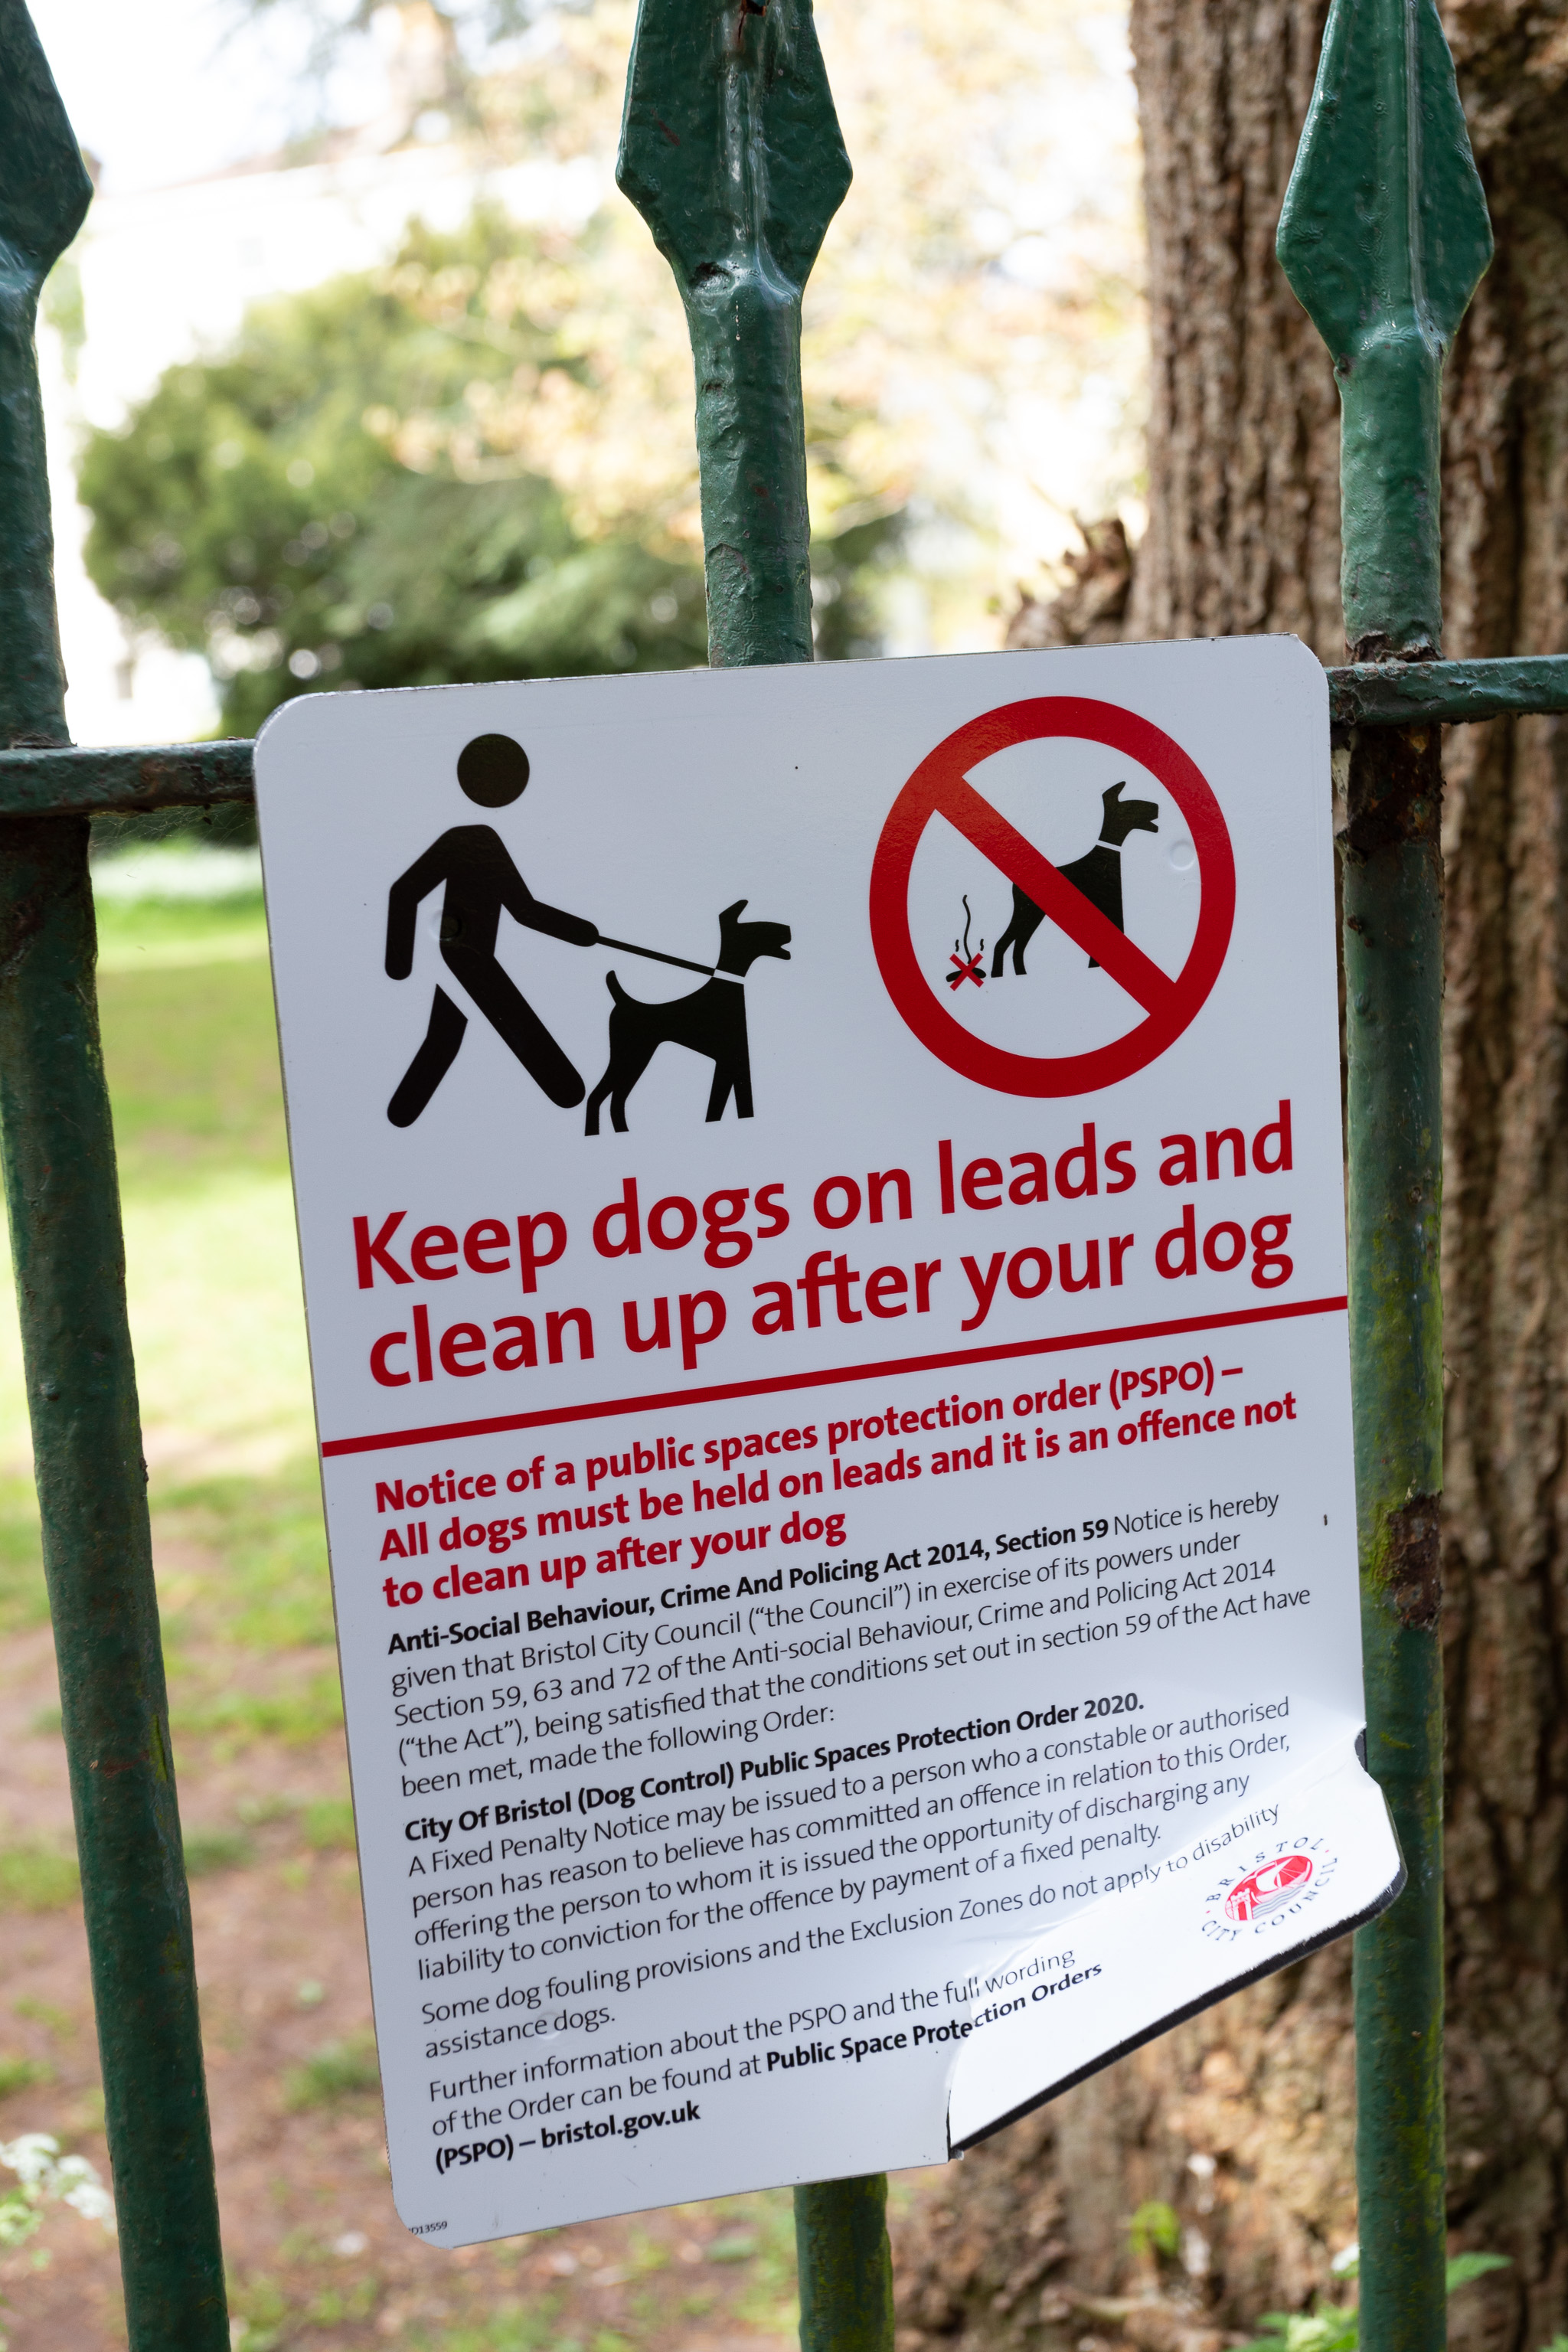 Bent Out of Shape
There's been some commotion on Nextdoor about the recent appearance of this sign. Lots of people who have been letting their dogs off their leads i...